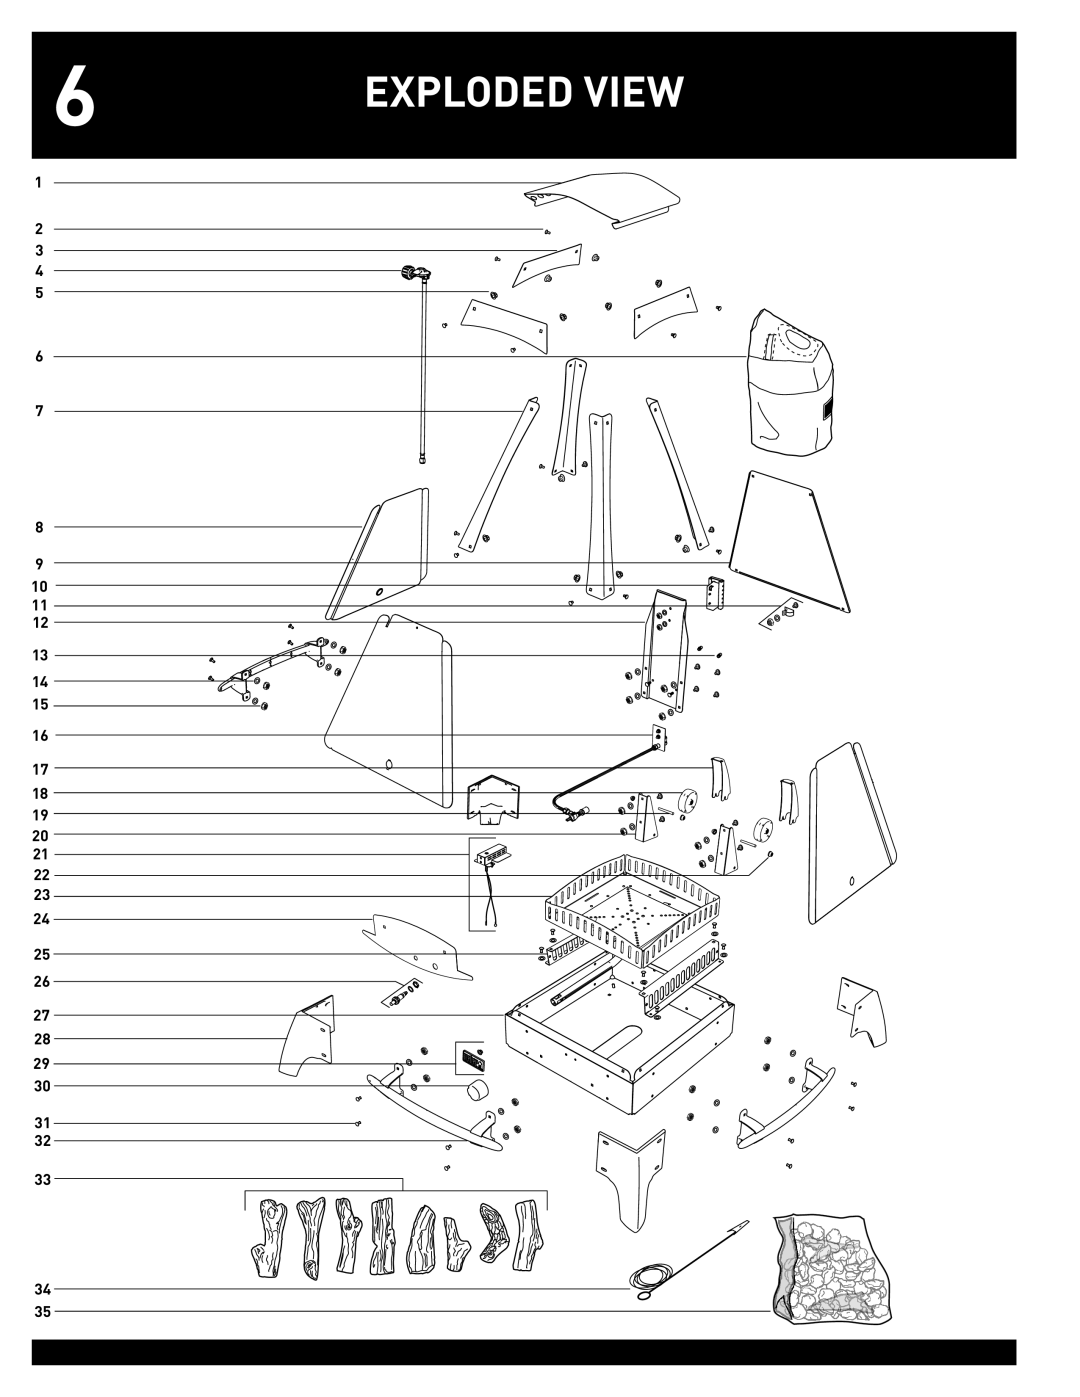 Weber #43028 manual Exploded View, 1 2 3 4 5 6 7 8 9 10 11 12 13 14 15, 20 21 22 23 24 25 27 28 29 30 31 